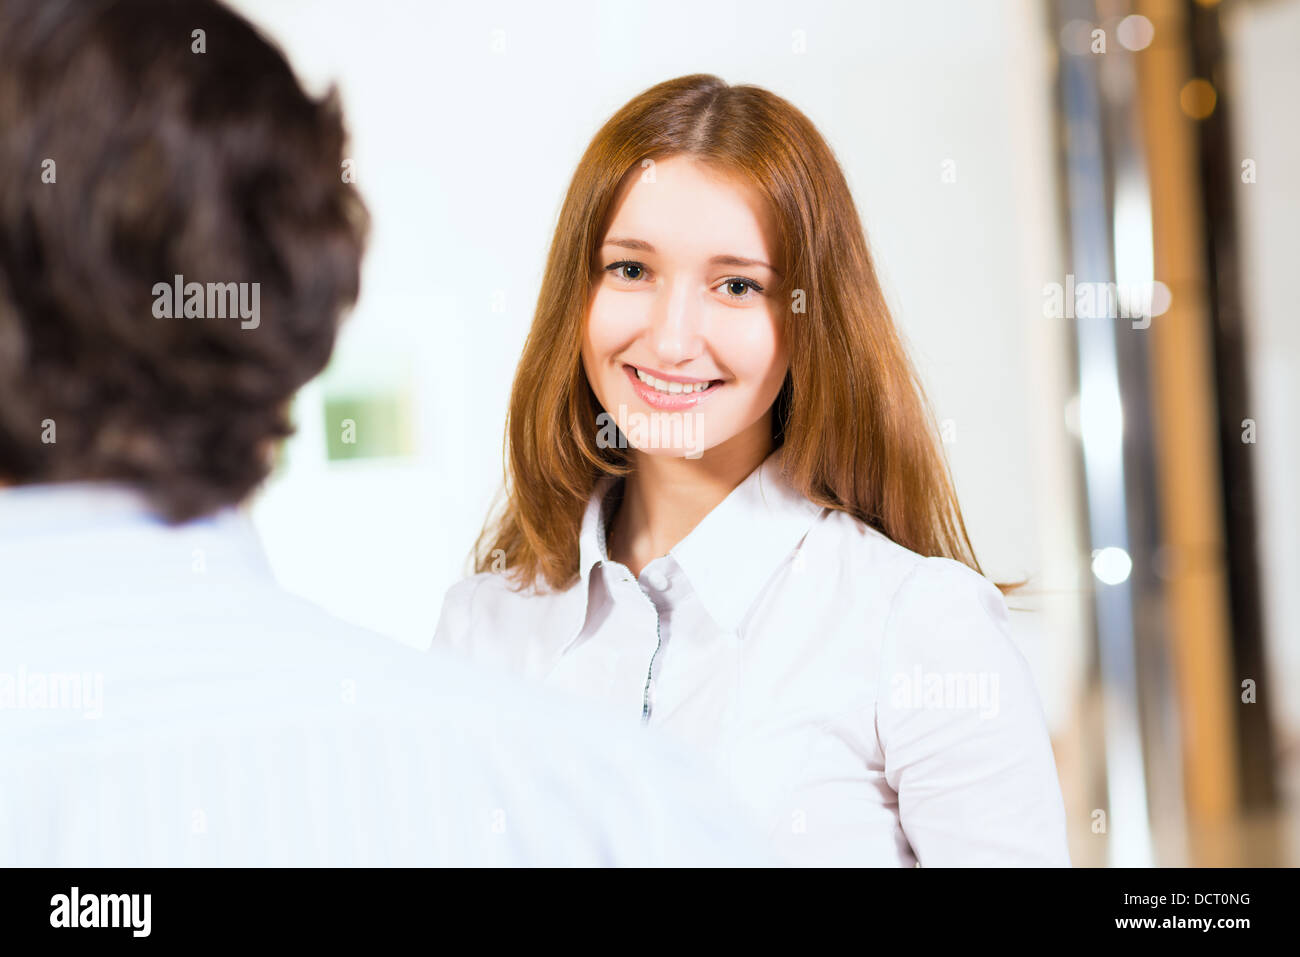 Attractive woman talking with a man Stock Photo